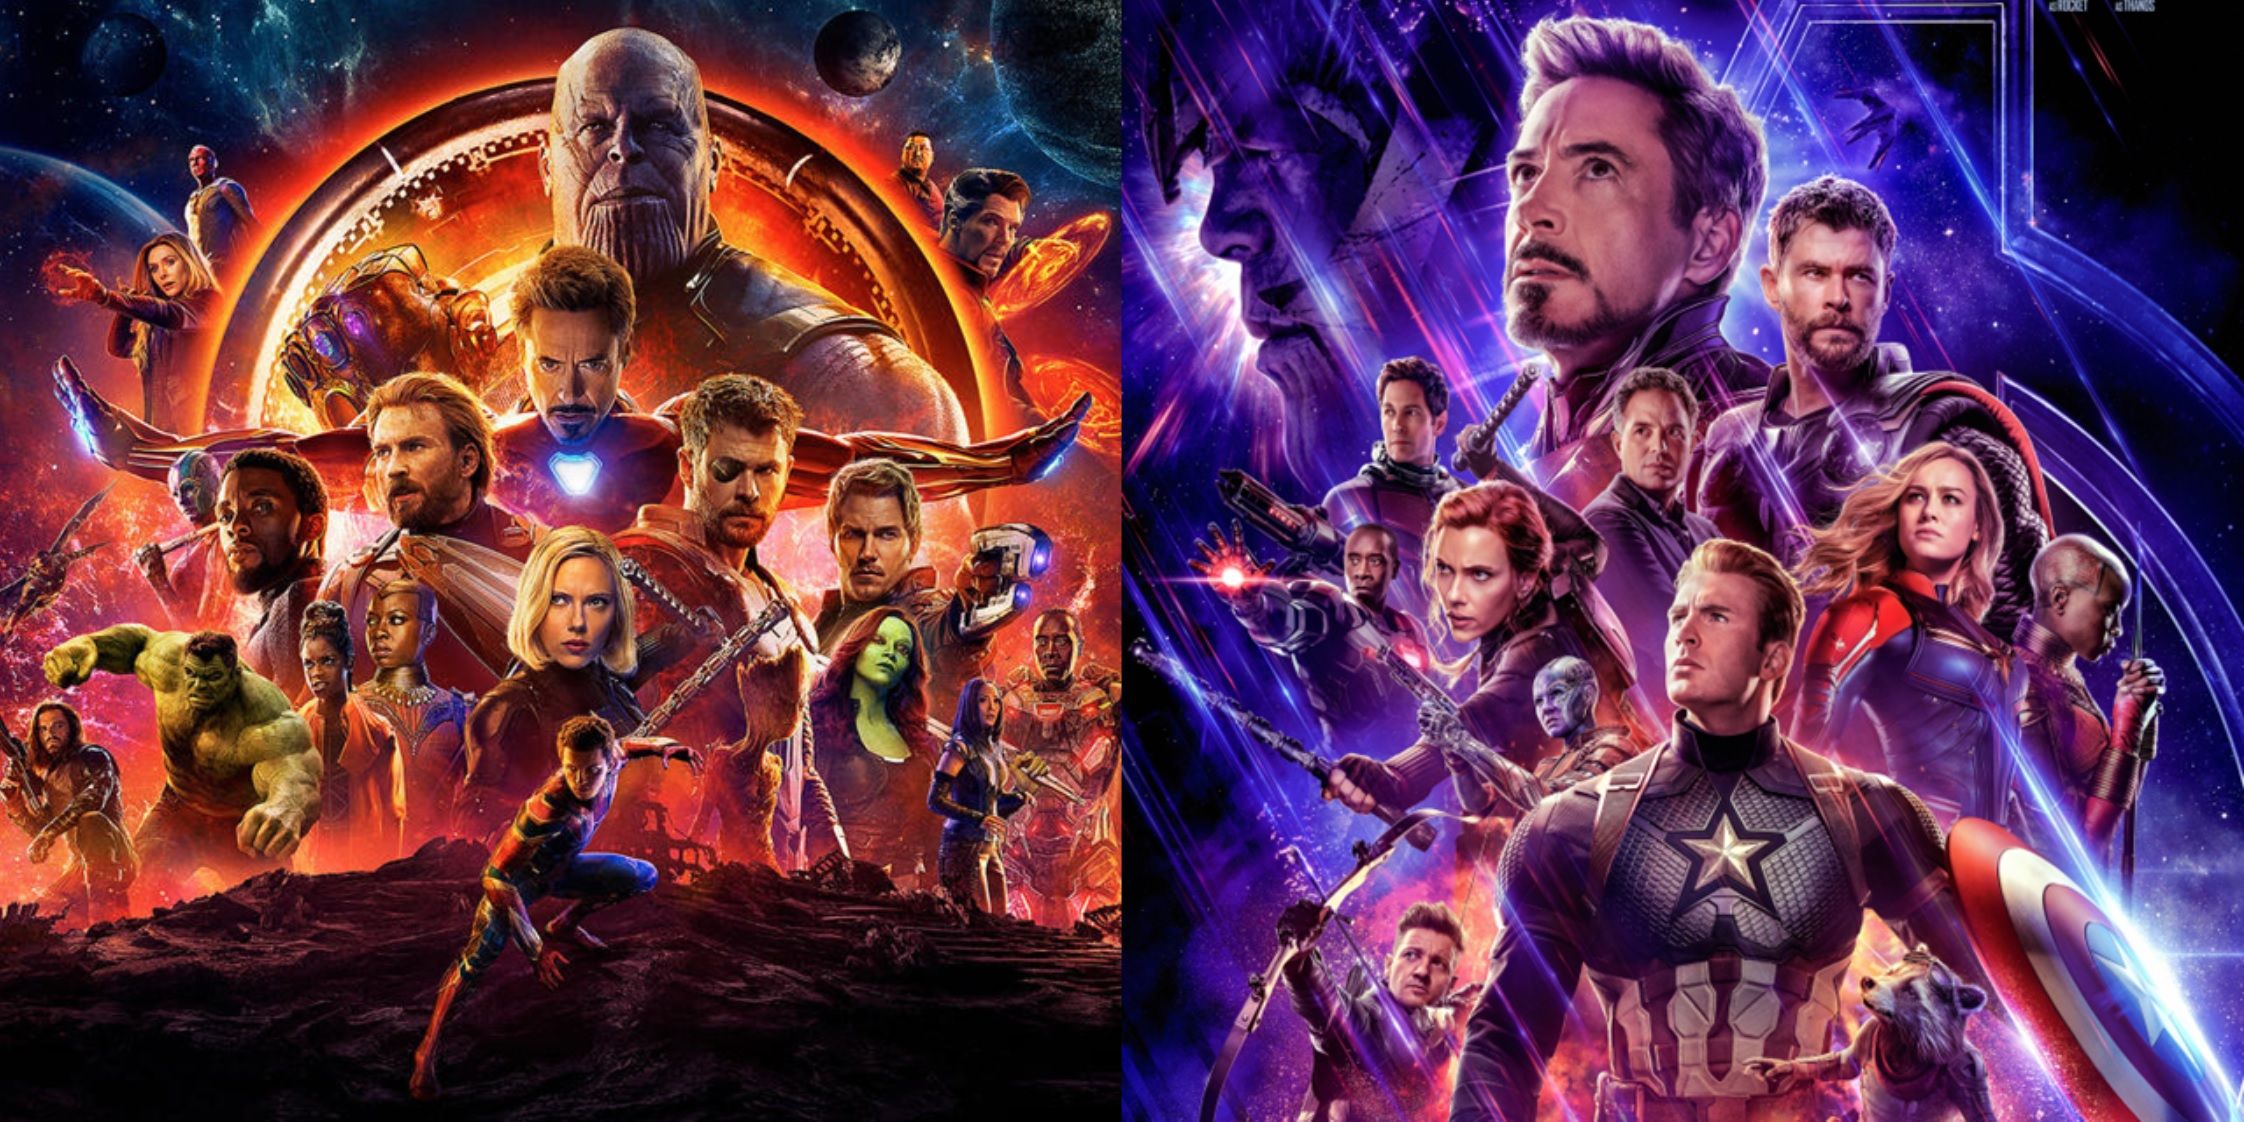 Split image of the posters for Avengers Infinity War and Avengers Endgame